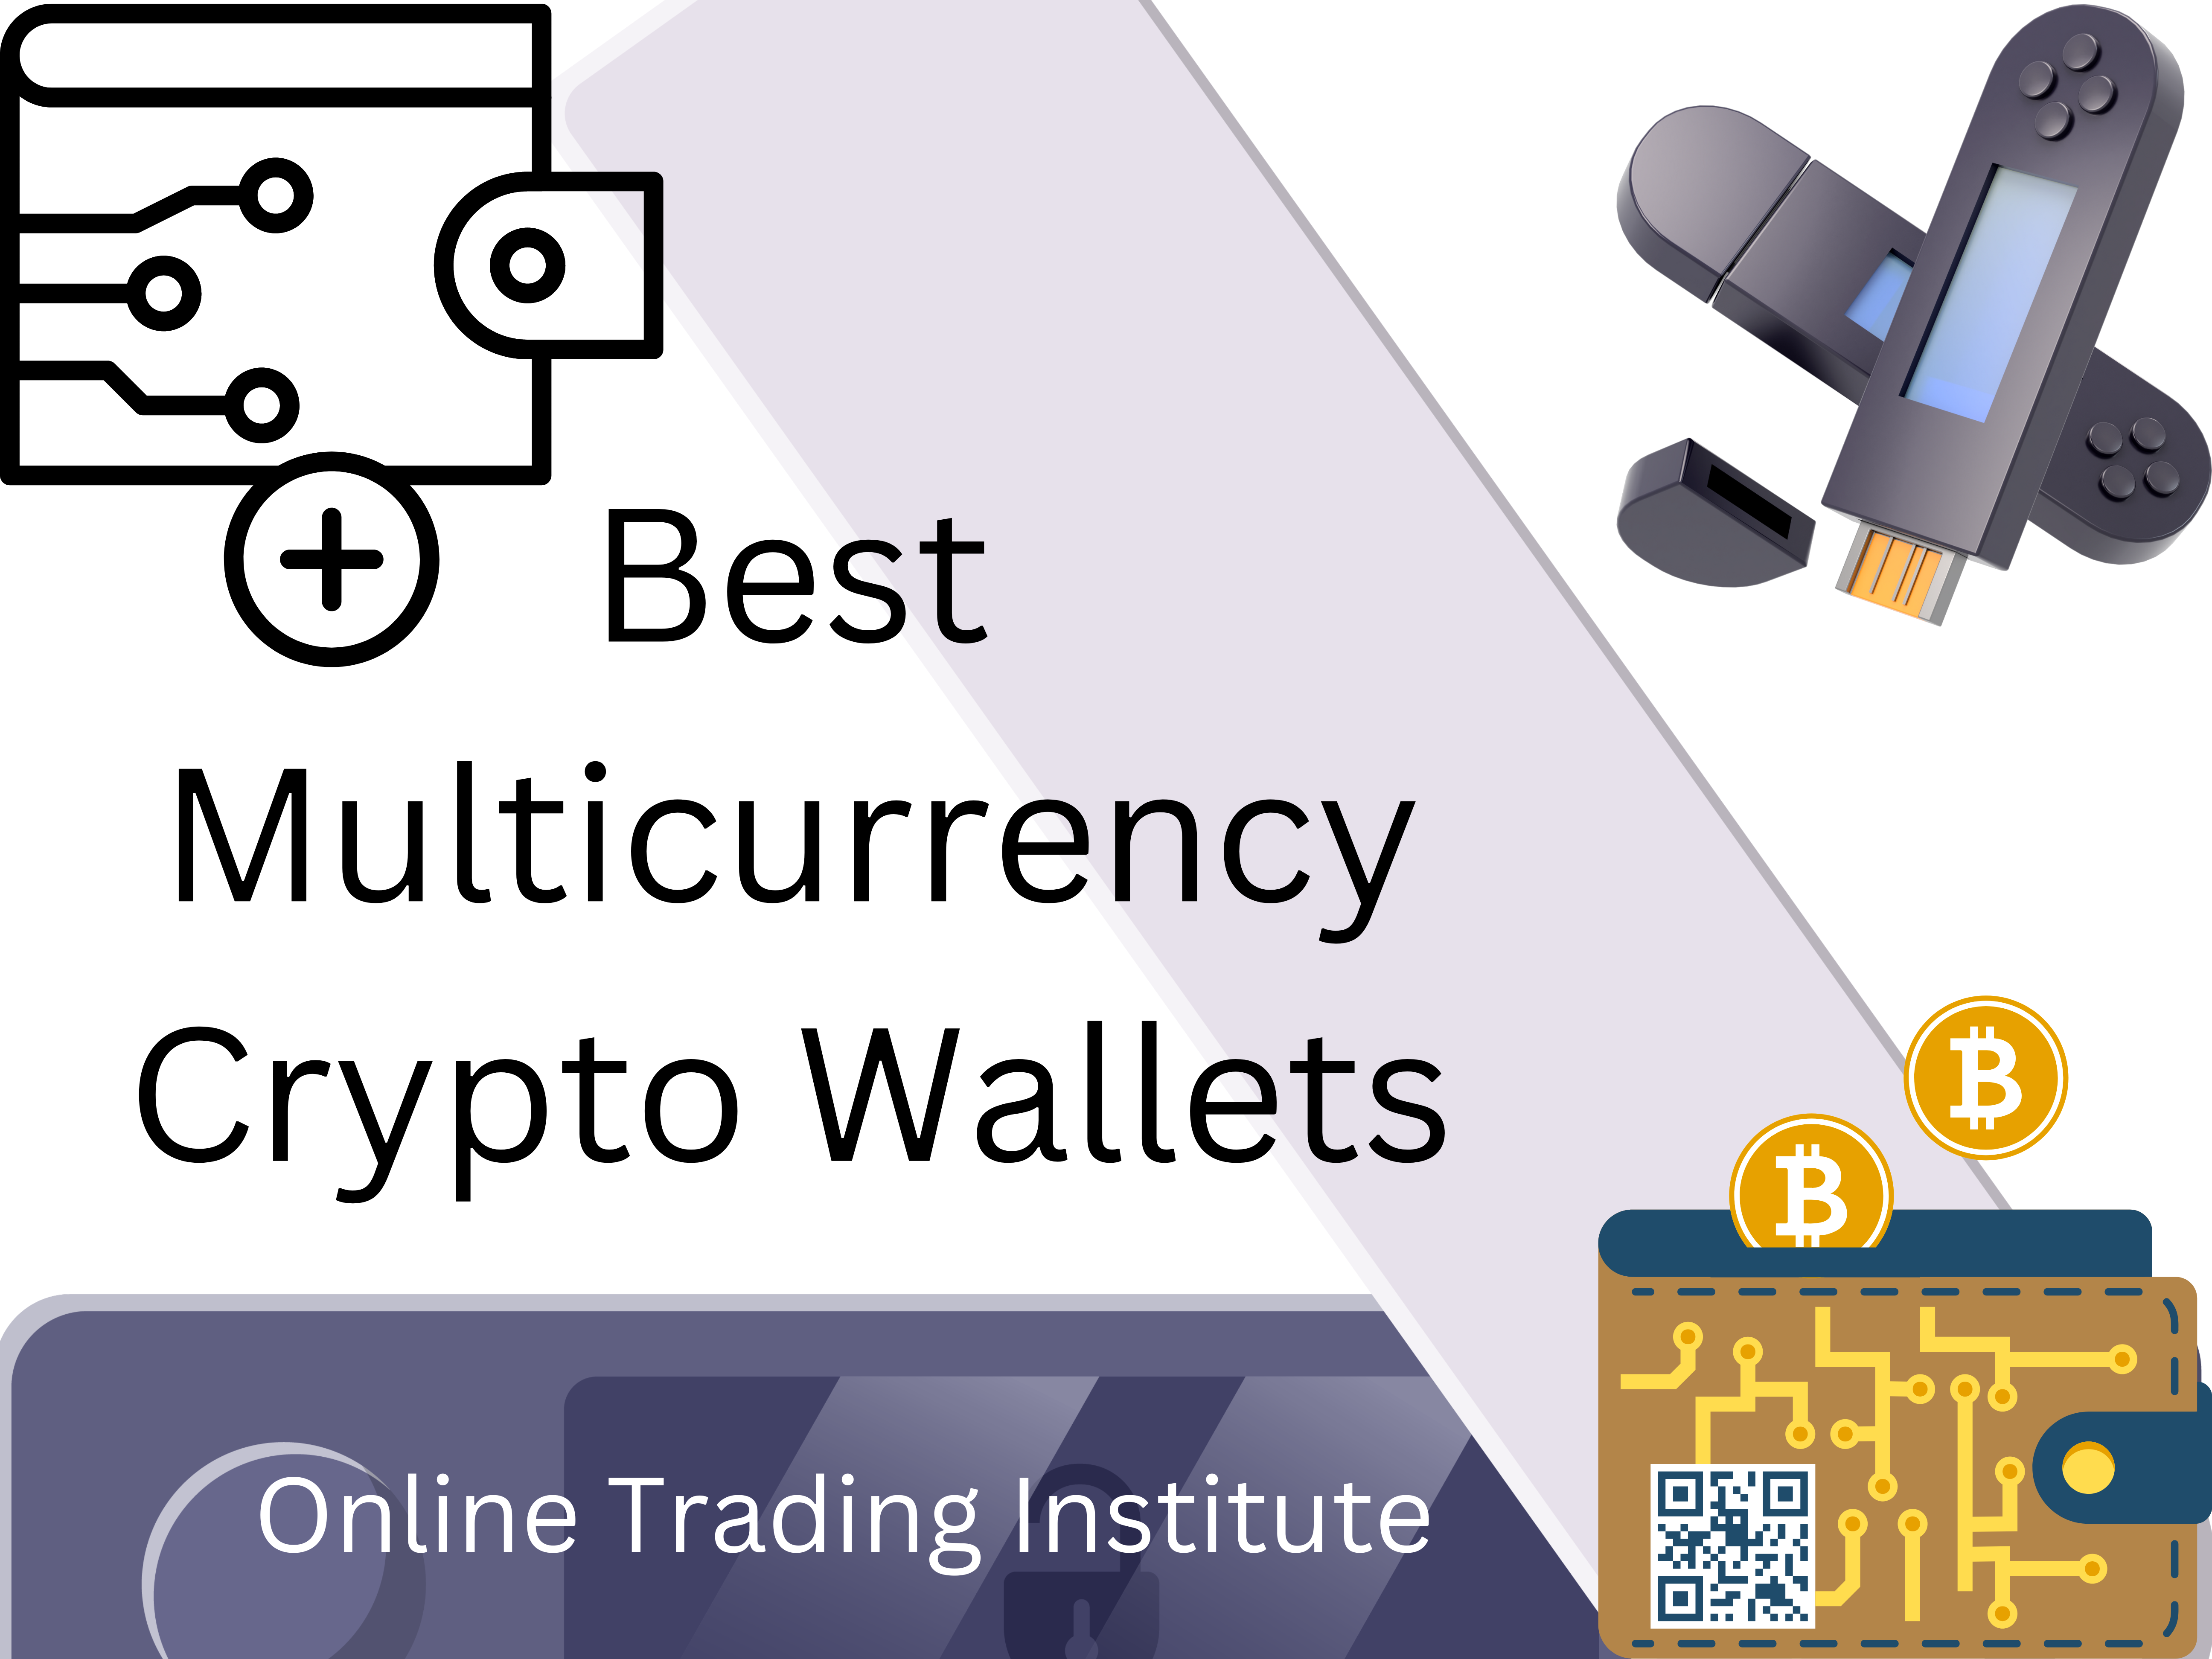 Best Multi Crypto Wallets for Android & iOS – Hardware & Mobile Version